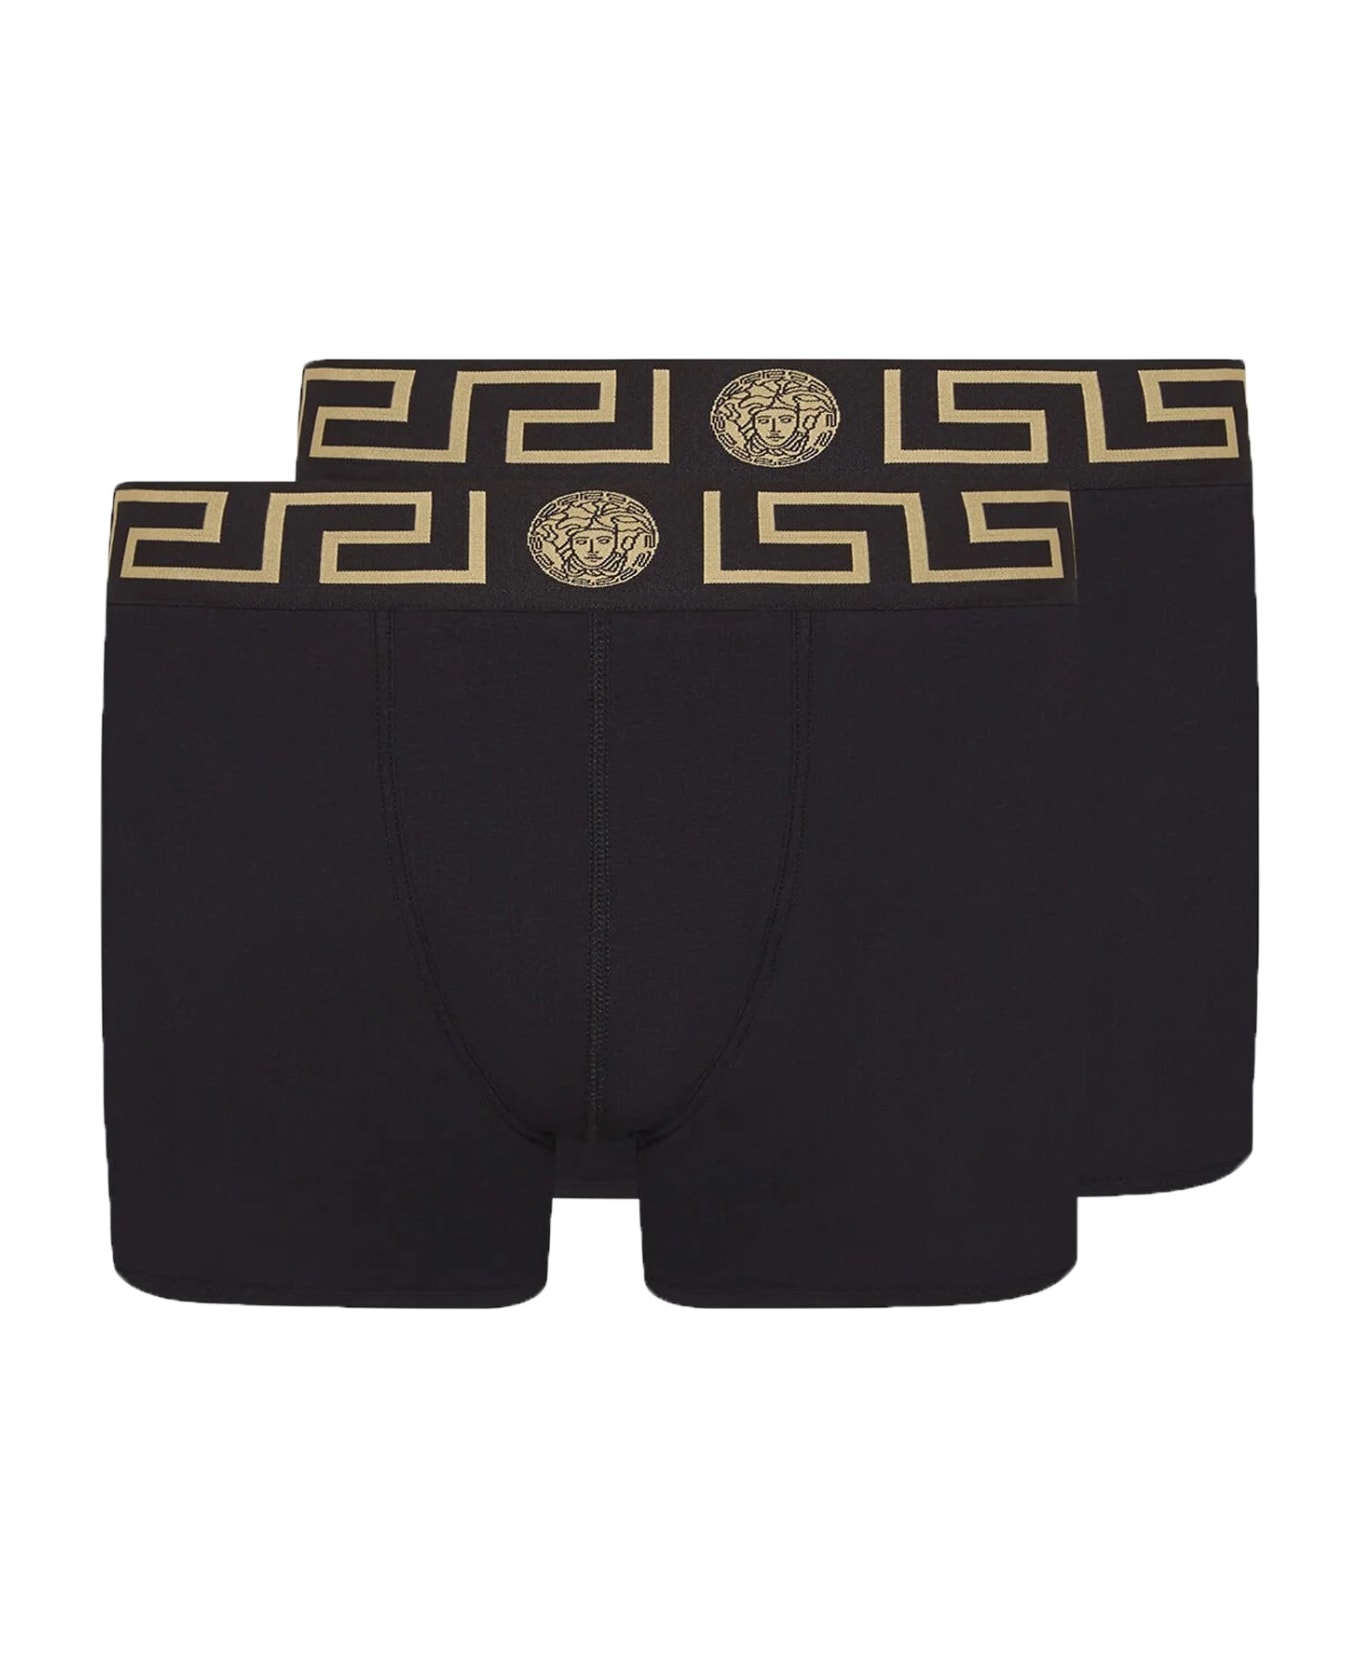 Versace Pack Of Two Boxer Shorts With Greek Motif - NERO GRECA ORO